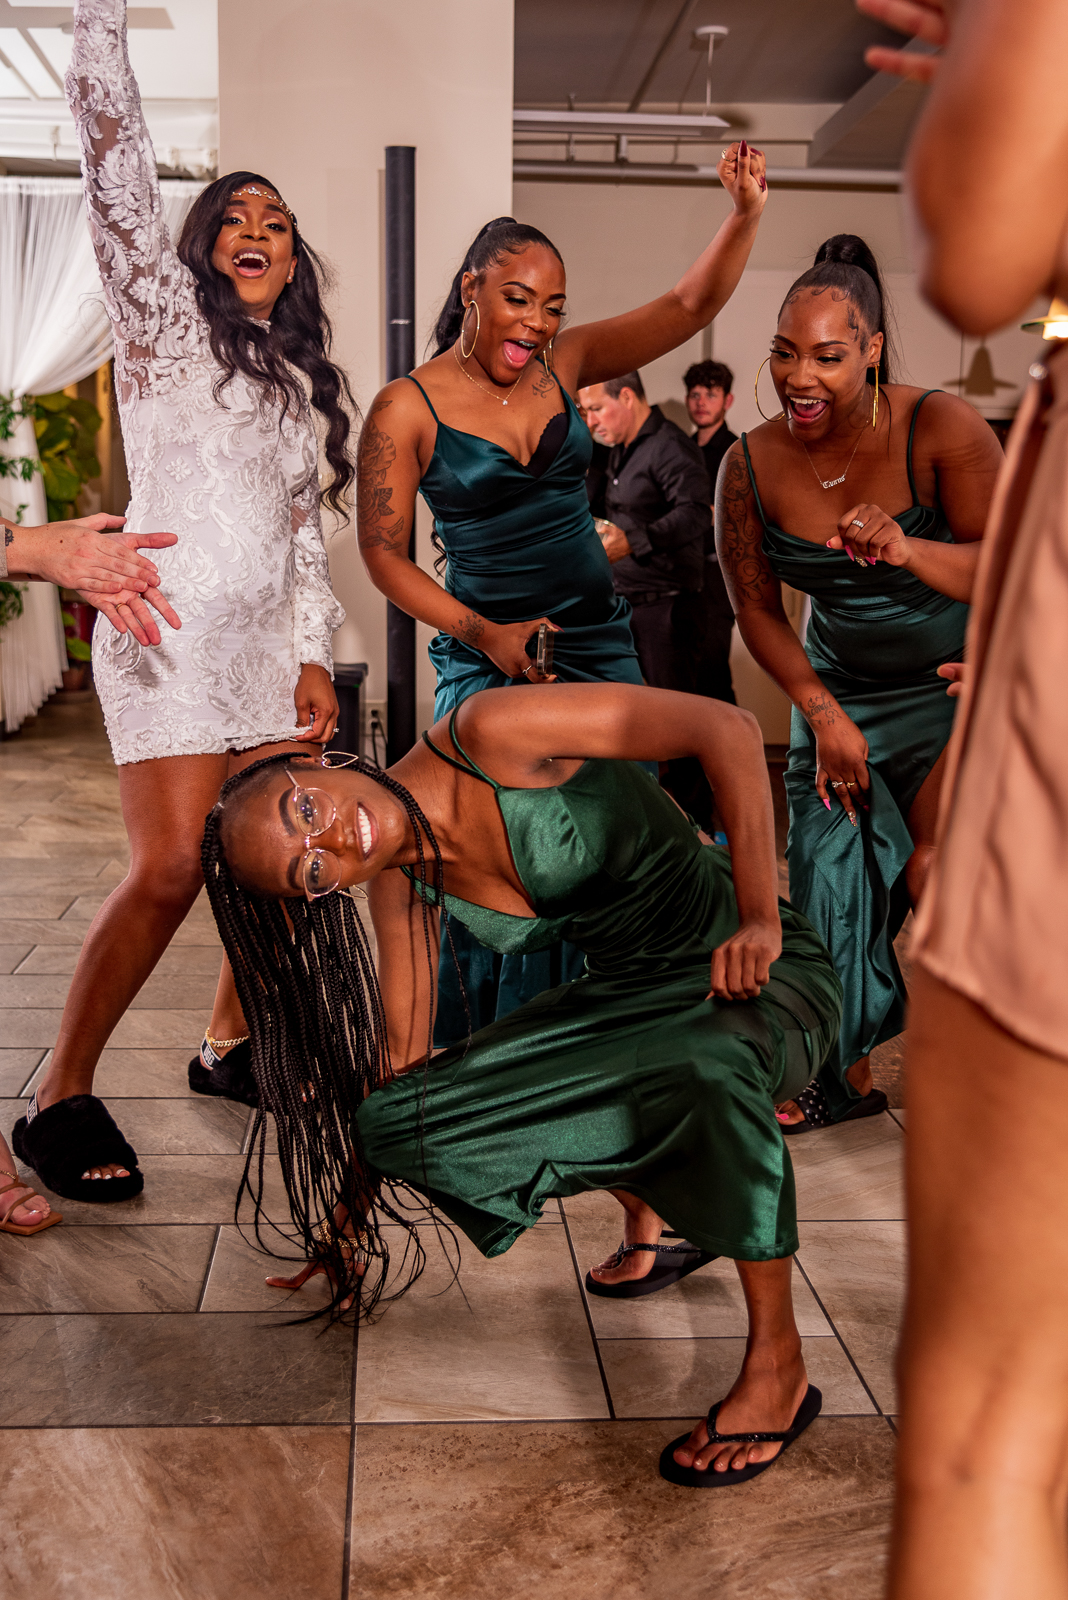 Bride with bridesmaids, dance, music, DJ, fun, African American wedding, urban wedding reception at Penthouse Events, Ohio City, Cleveland Flats